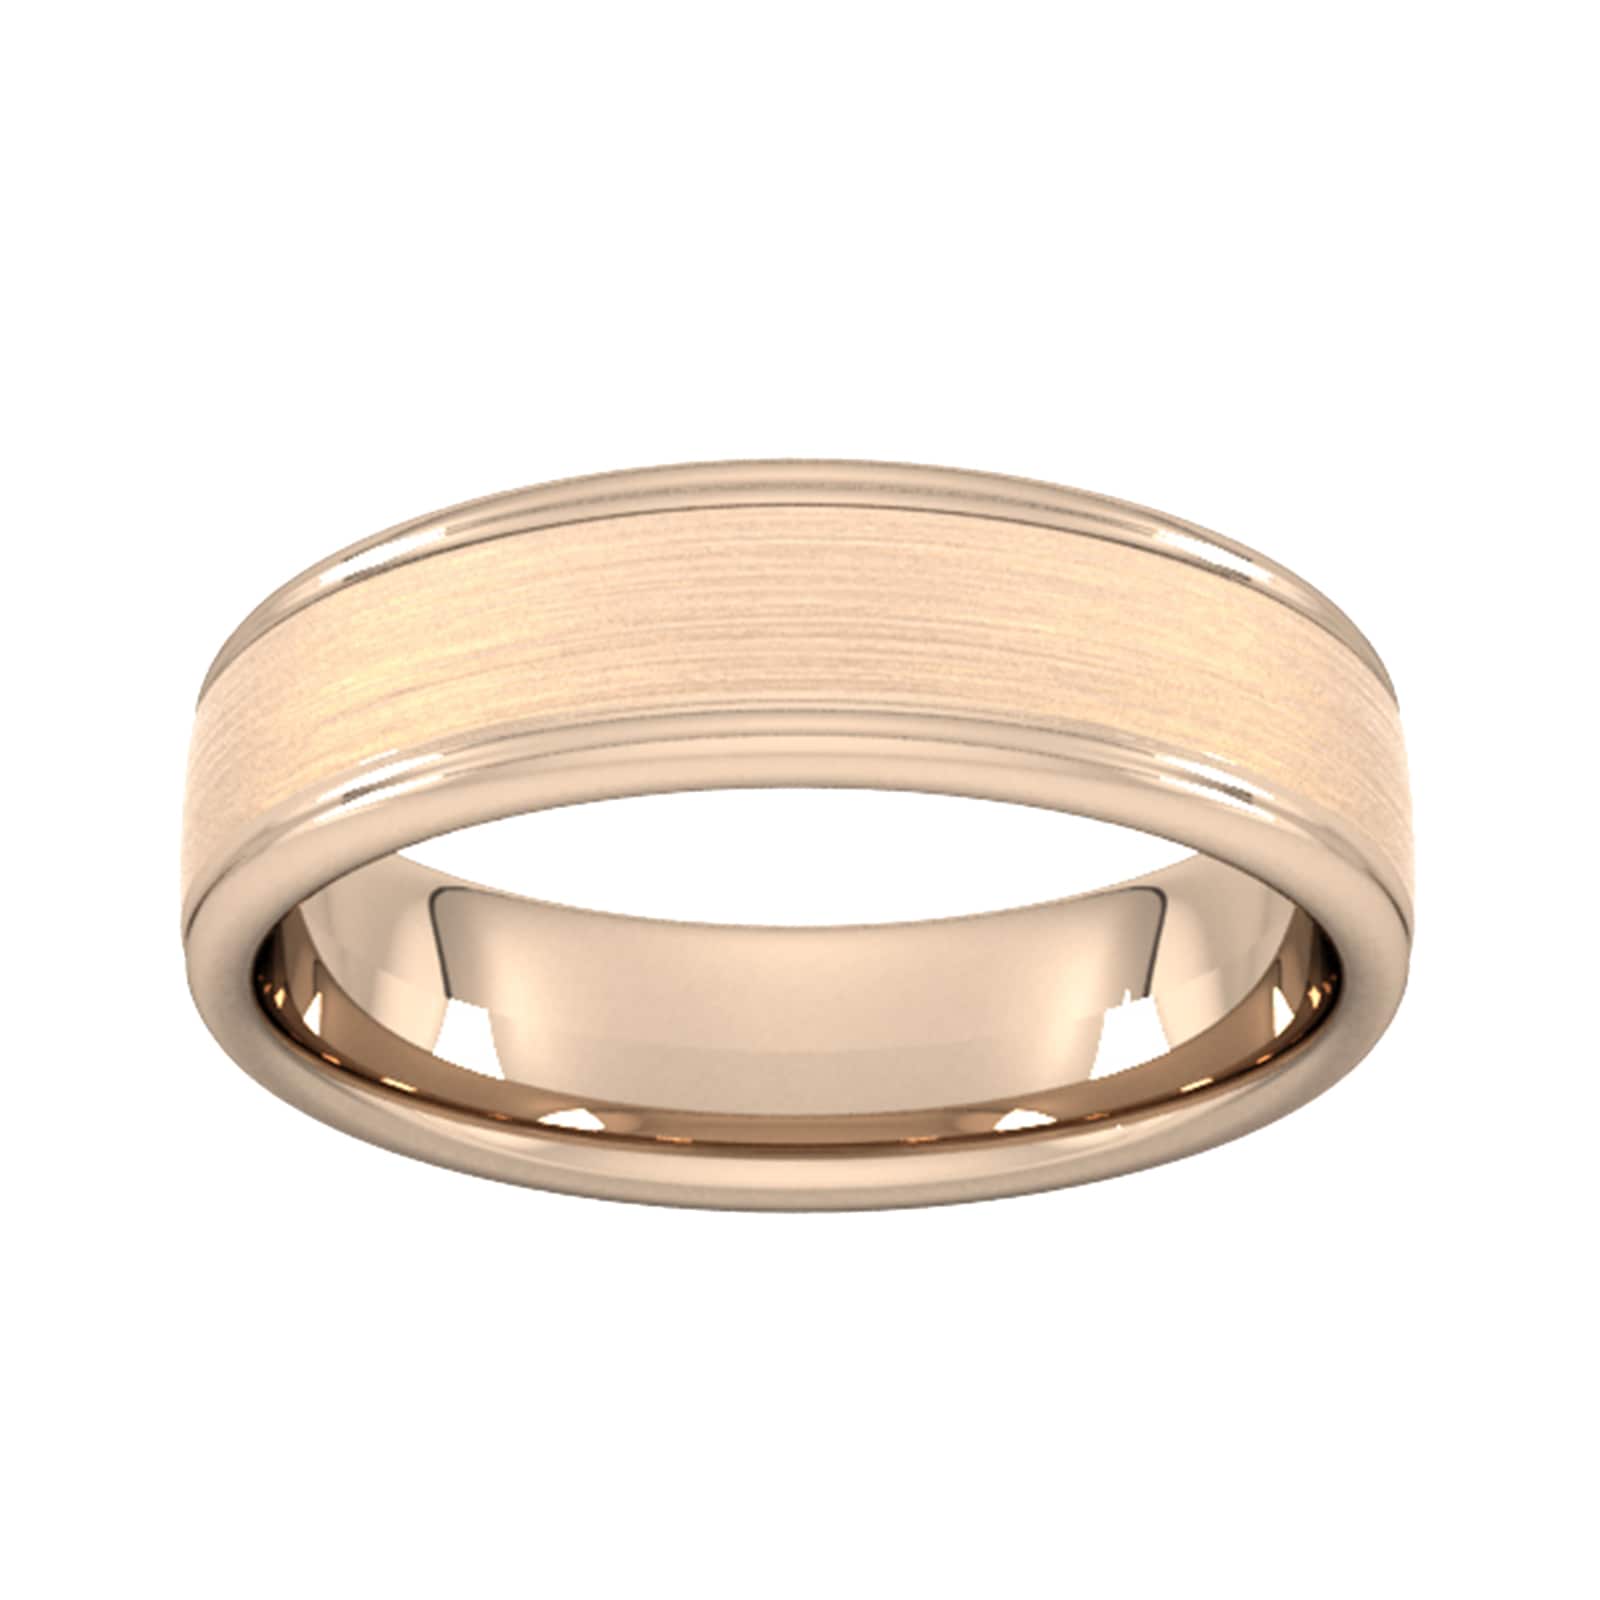 5mm Traditional Court Standard Matt Centre With Grooves Wedding Ring In 9 Carat Rose Gold - Ring Size S